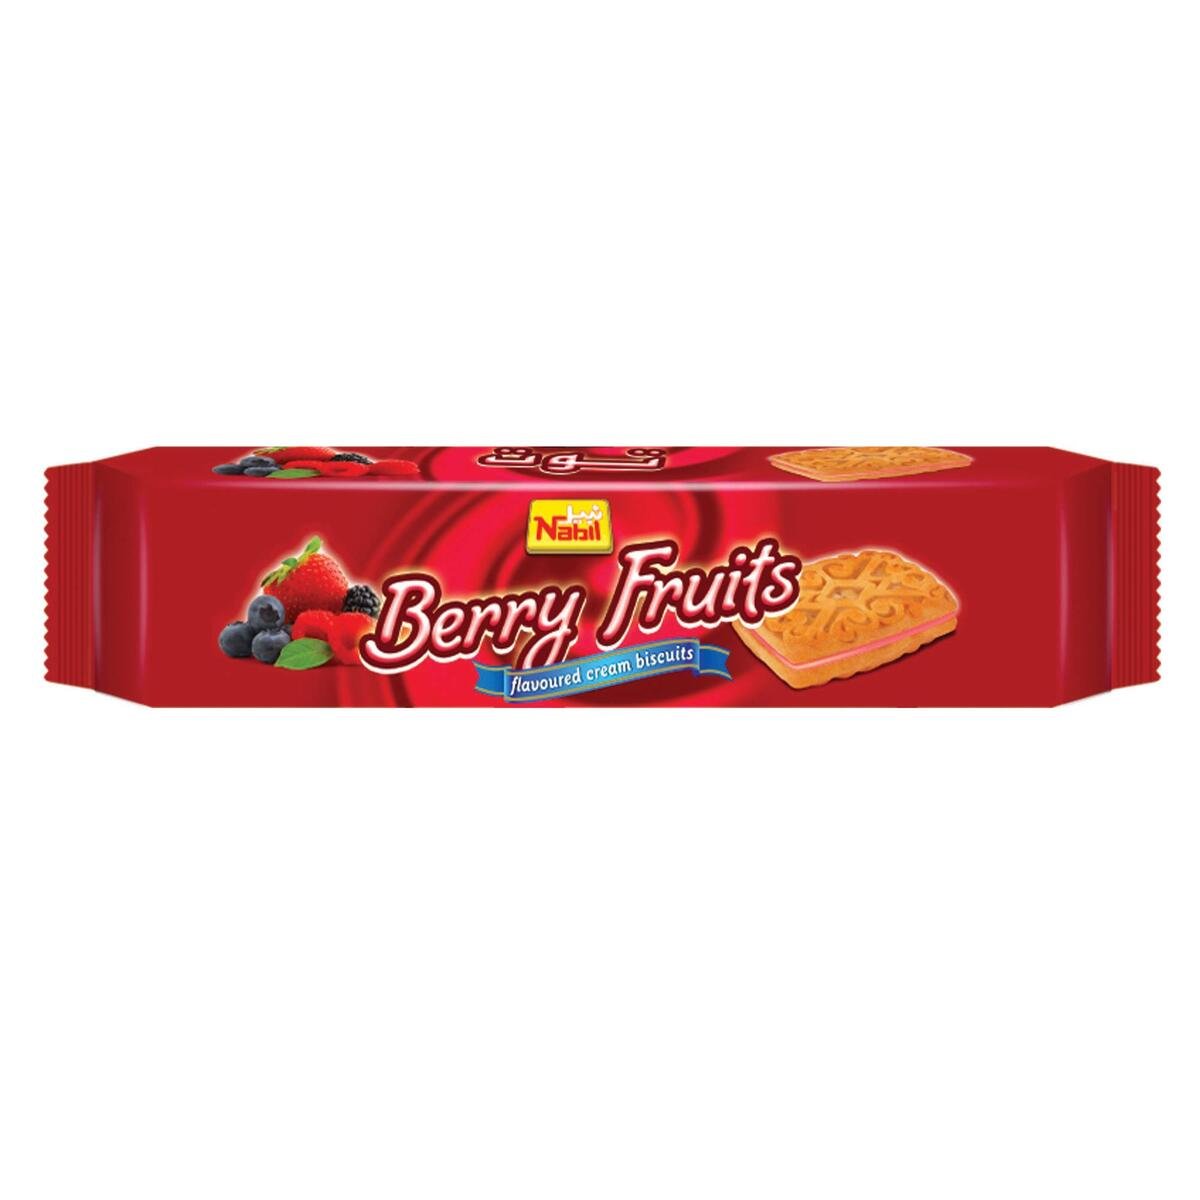 Nabil Berry Fruits Flavoured Cream Biscuits 82g